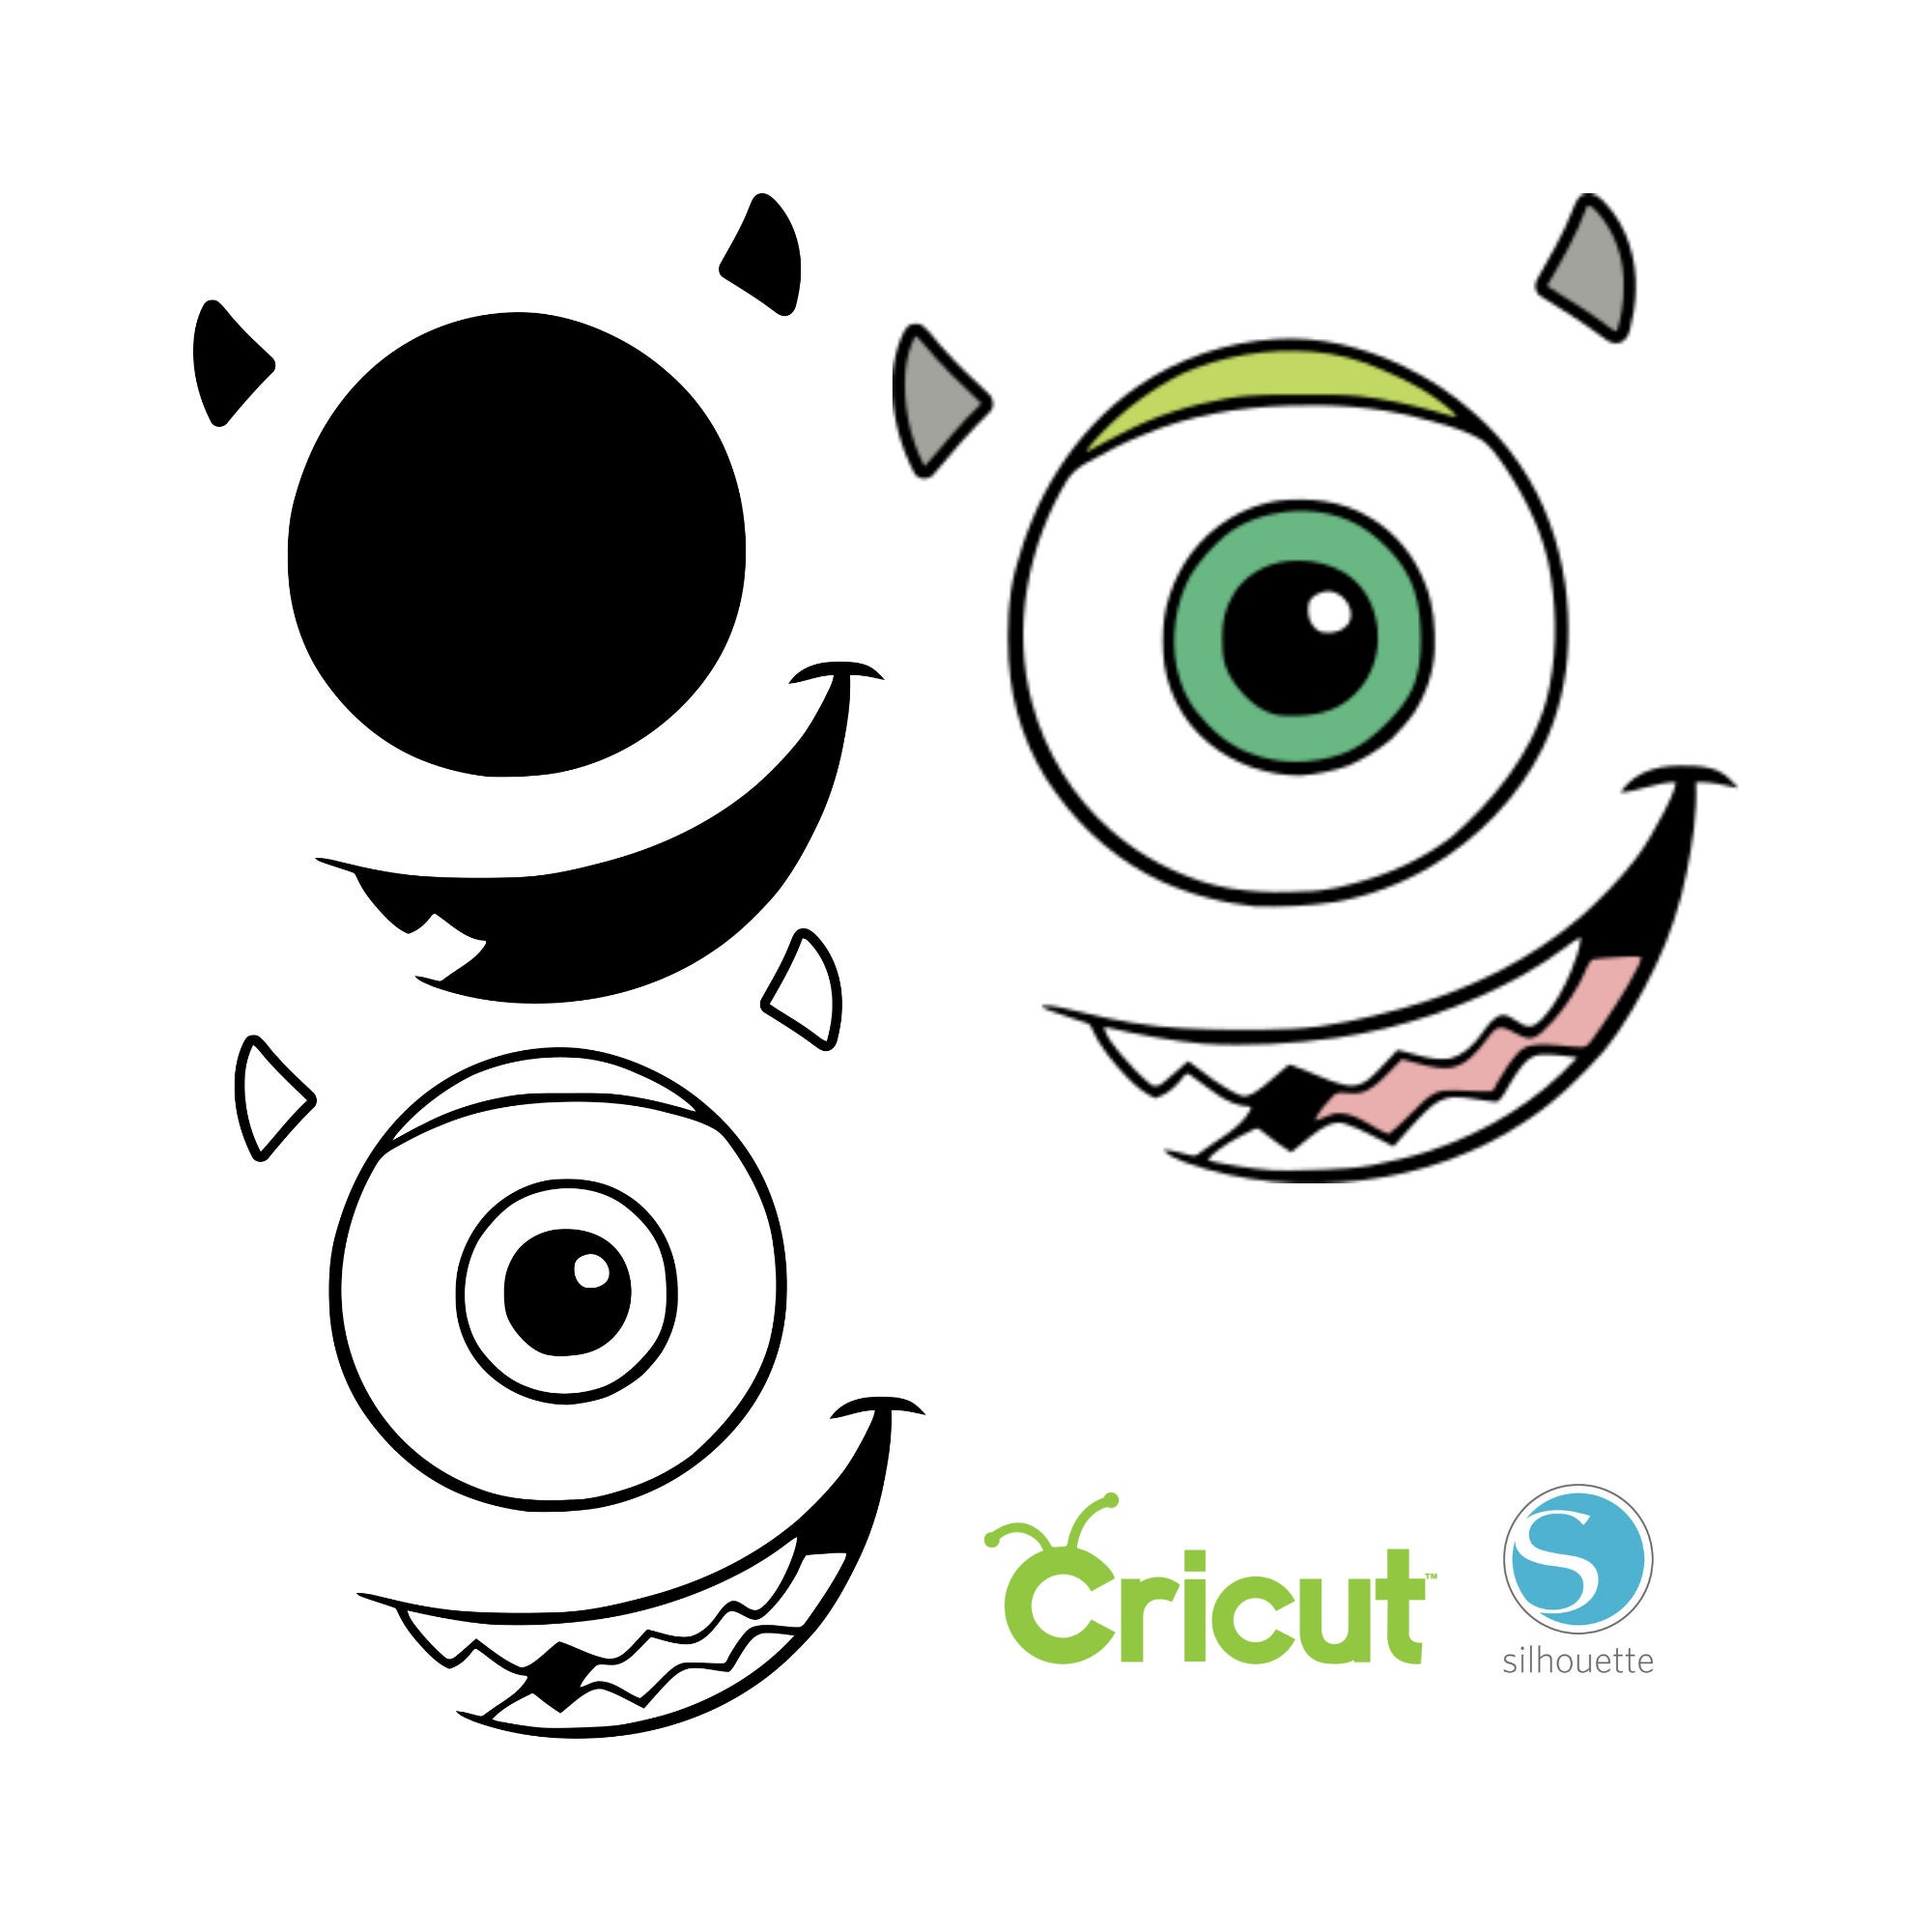 Monsters Inc characters svg, Mike Wazowski svg, Sulley svg, - Inspire Uplift